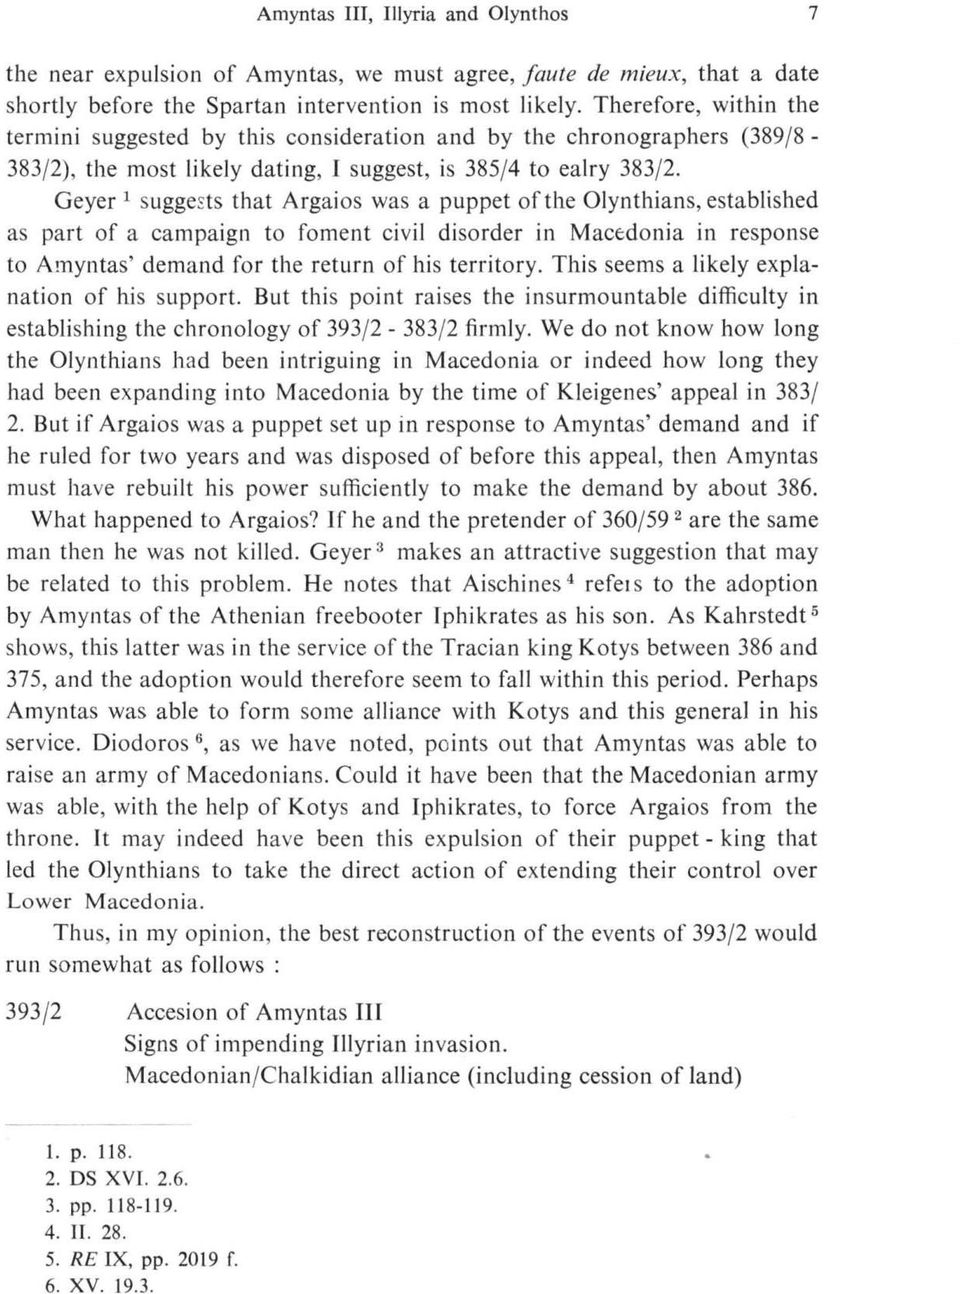 Geyer 1 suggests that Argaios was a puppet of the Olynthians, established as part of a campaign to foment civil disorder in Macedonia in response to Amyntas demand for the return of his territory.